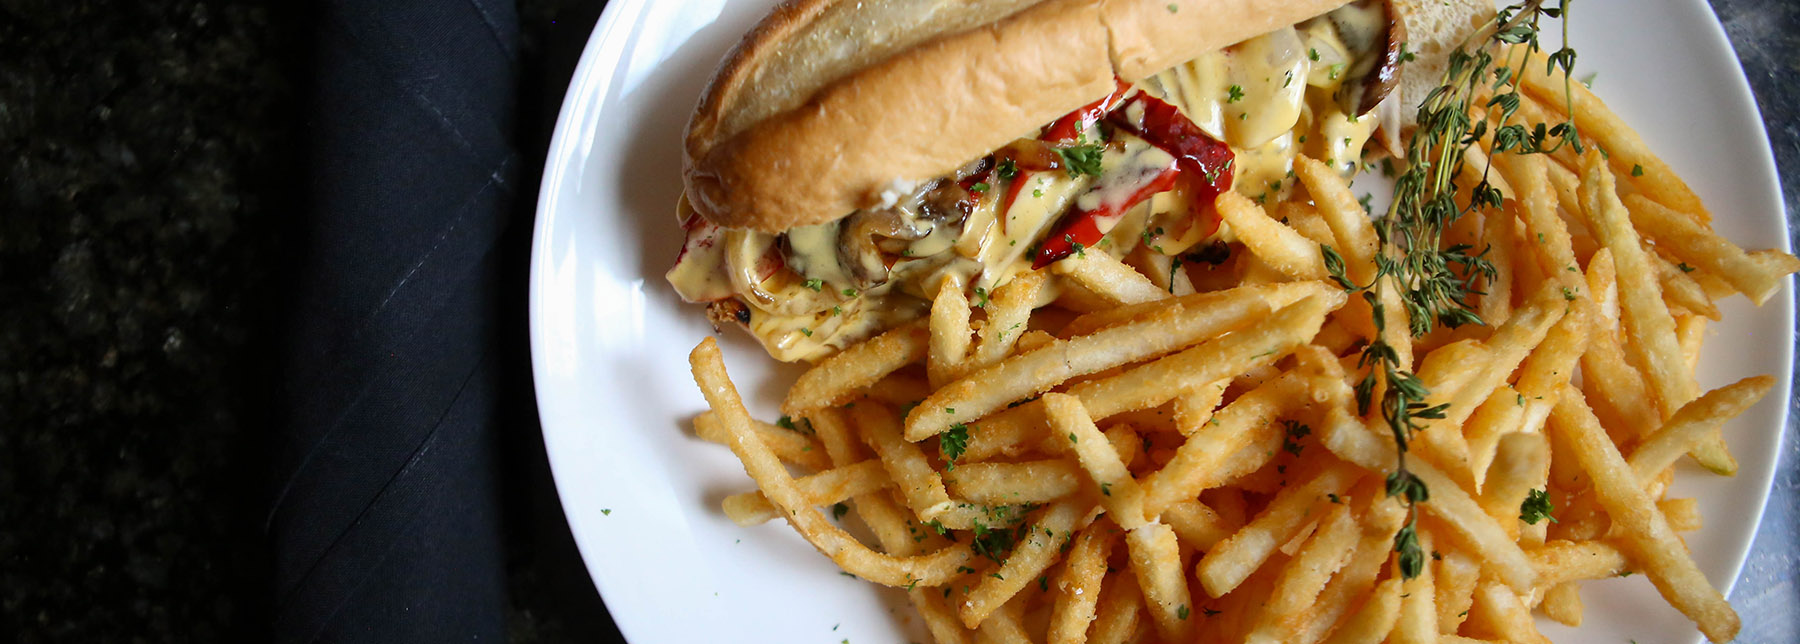 sandwich with fries